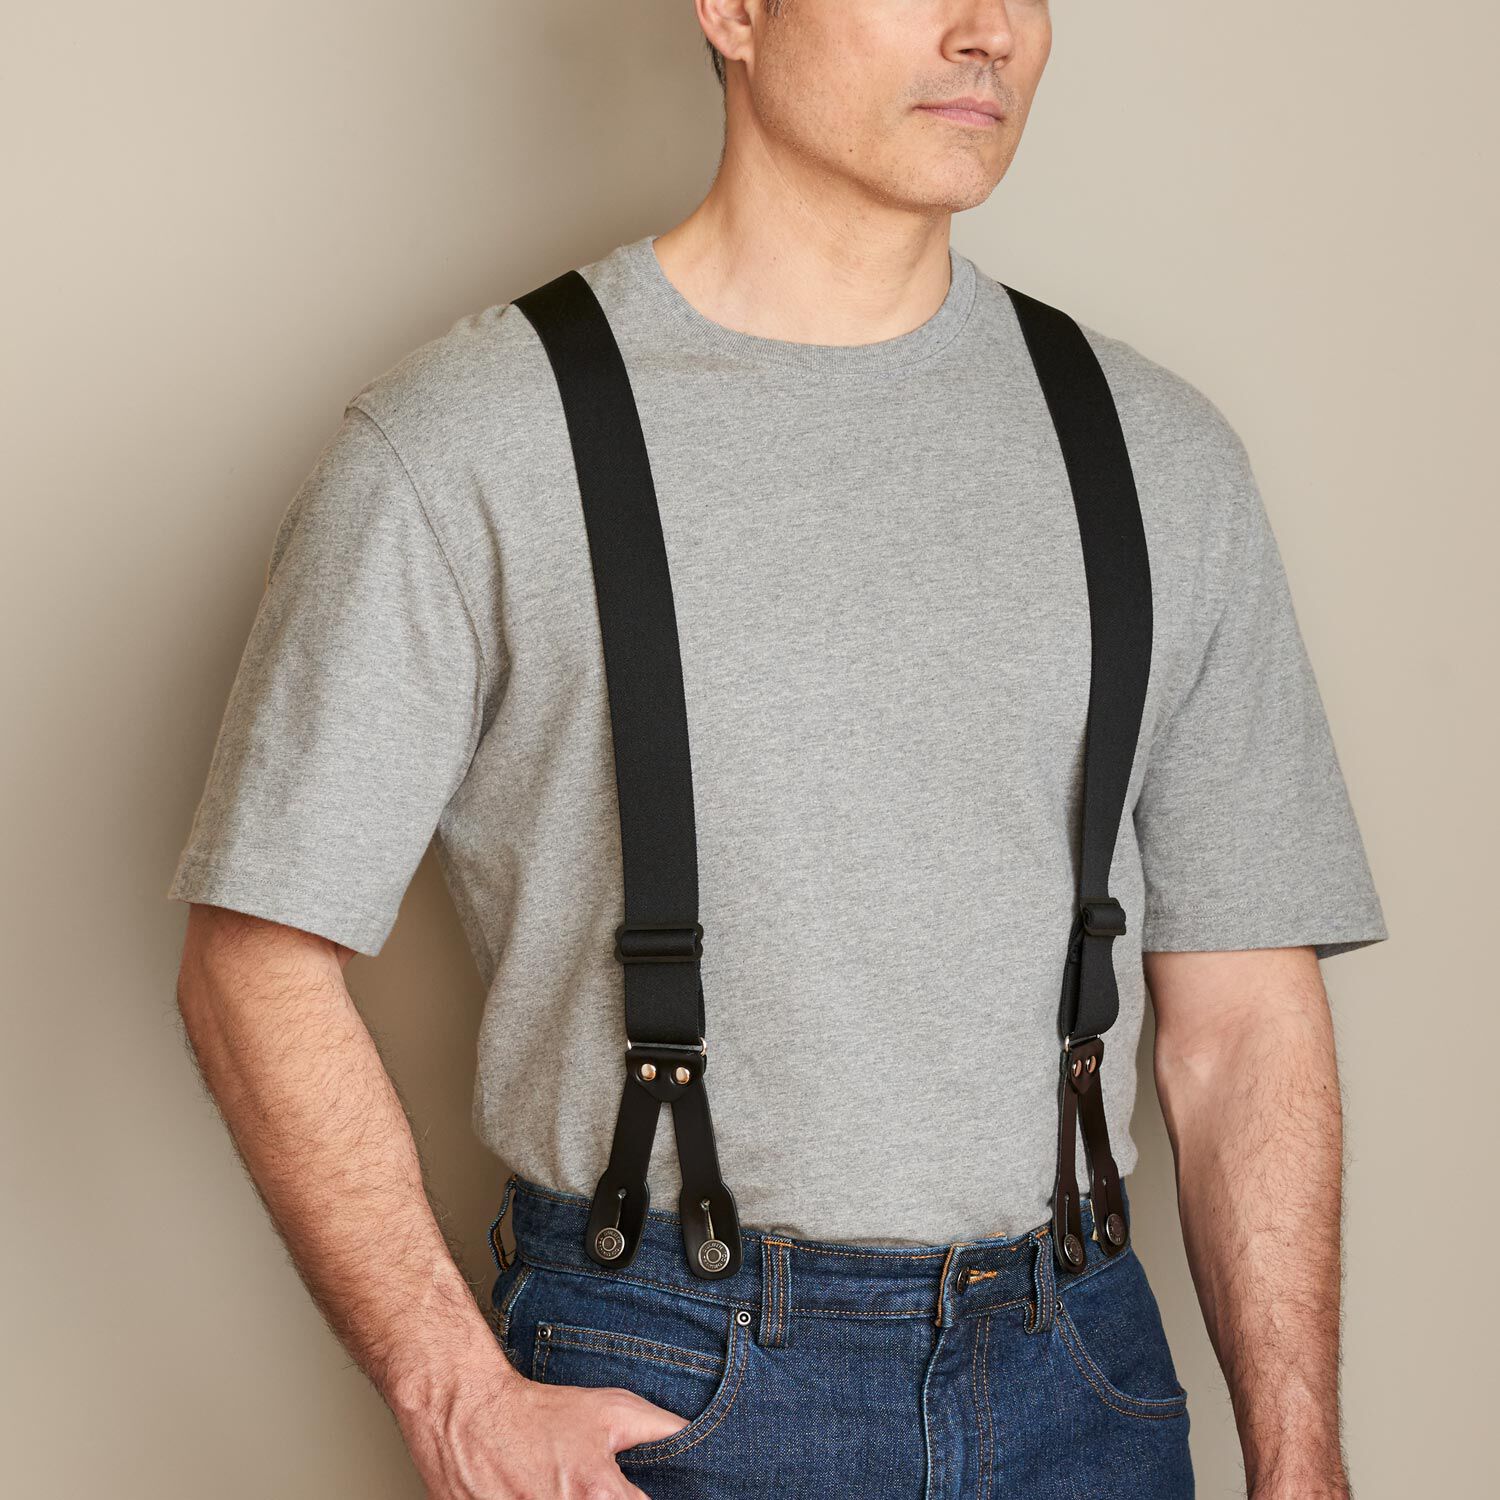 Mens Button End Suspenders 17-31 Inch Inch Y-Back Adjustable Elastic  Suspenders For Tuxedo Trousers Jeans Suit Shorts Best gift For Family Men -  Walmart.com